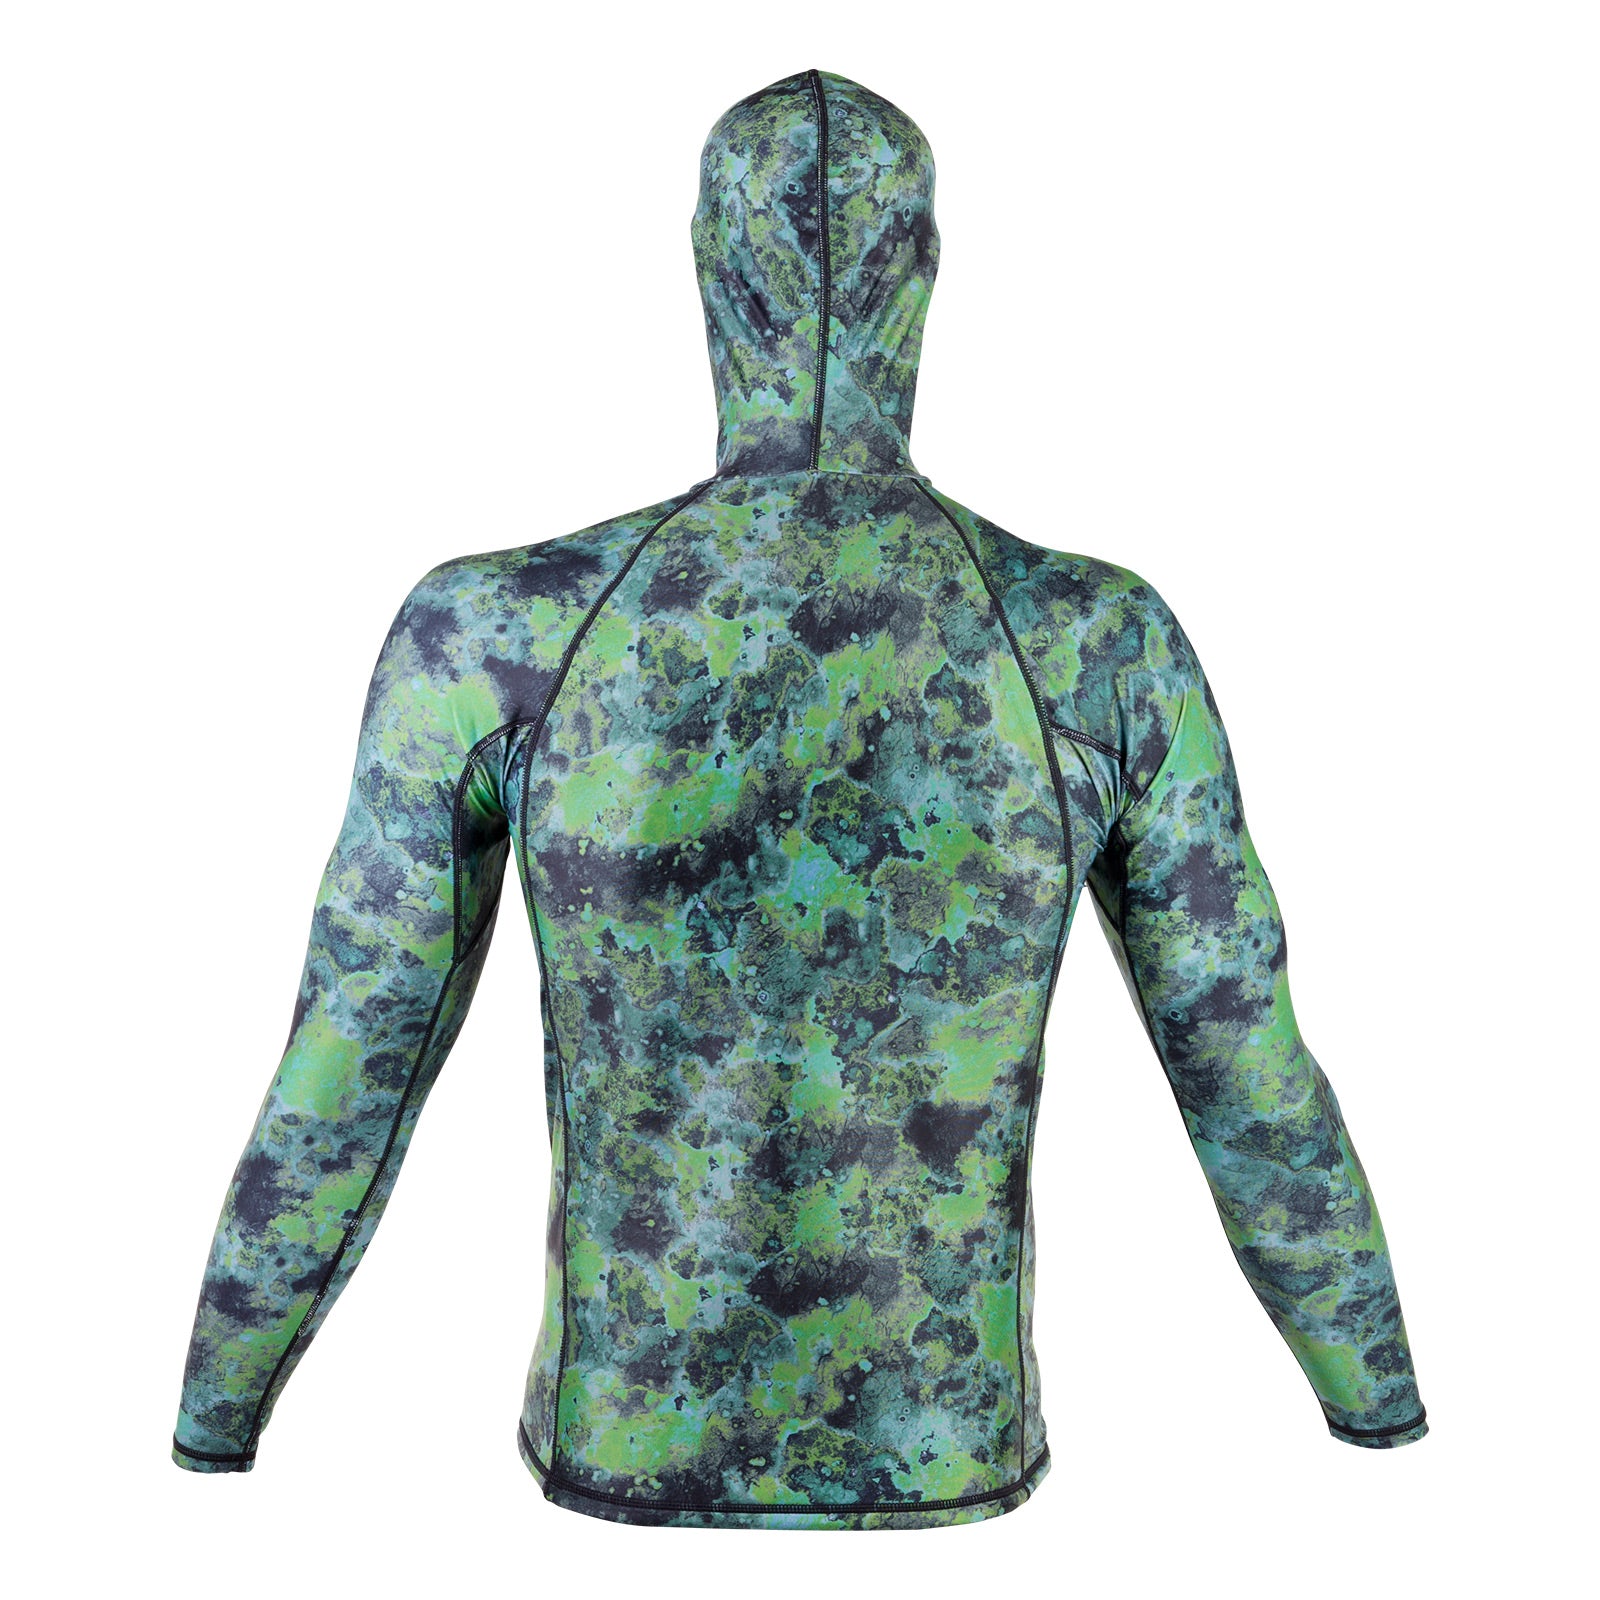 Puriguard Camouflage Hooded Suit